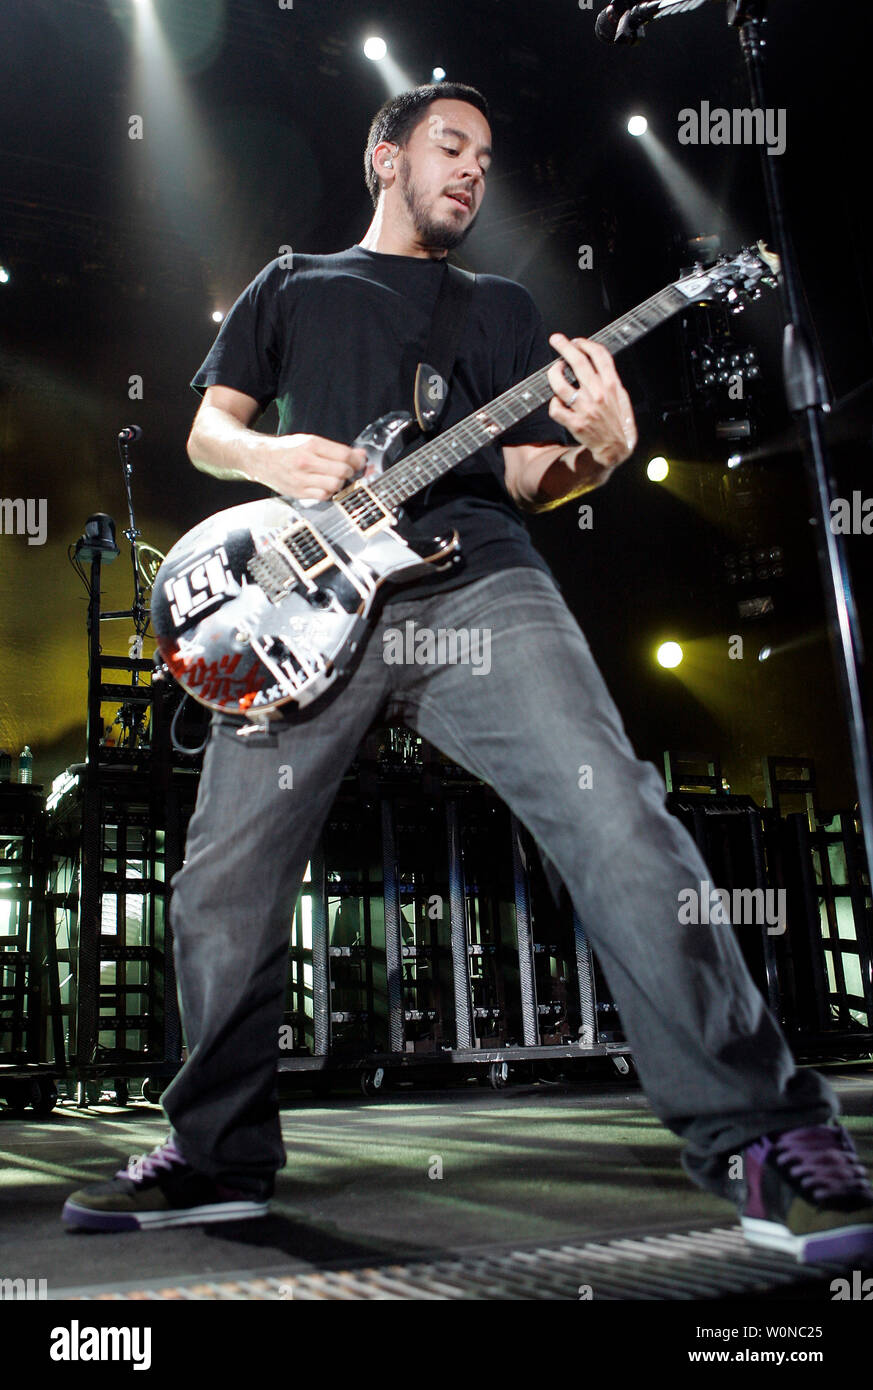 Mike Shinoda with Linkin Park performs in concert during the Projekt Revolution Tour at the Sound Advice Amphitheatre in West Palm Beach Florida on August 10, 2007.  (UPI Photo/Michael Bush) Stock Photo